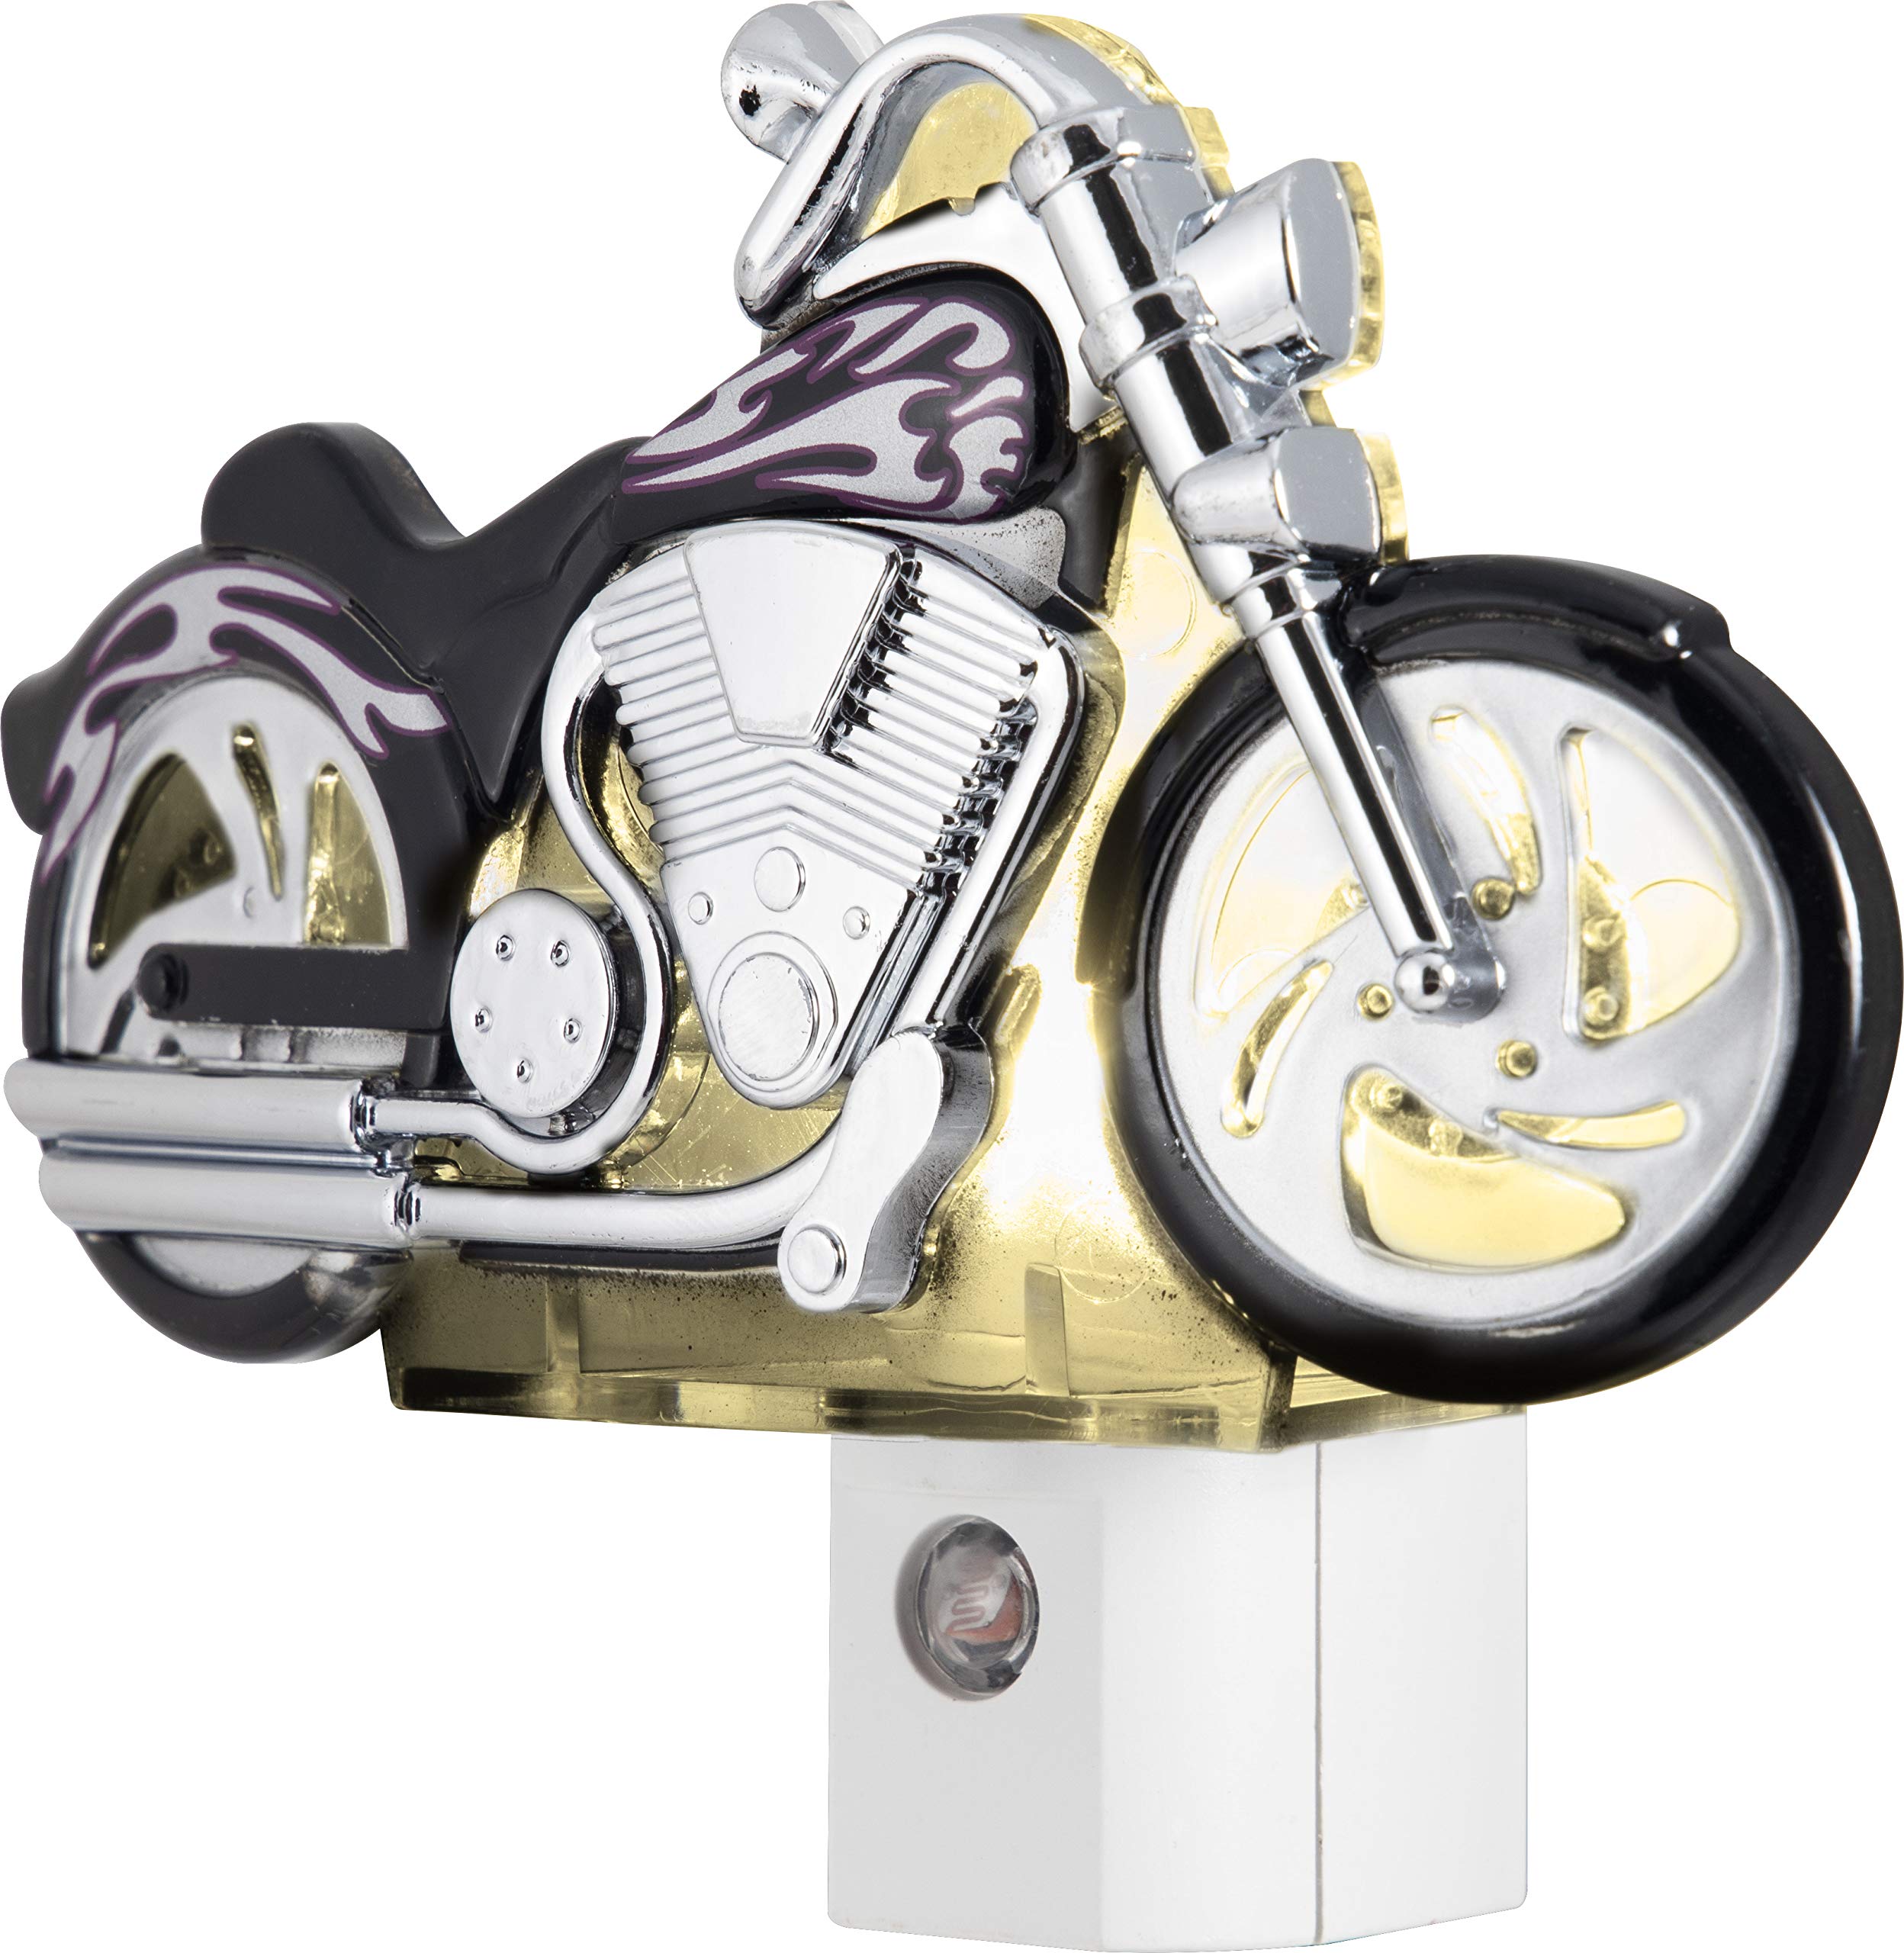 Book Cover GE LED Motorcycle Night Light, Plug-In, Dusk-to-Dawn Sensor, Auto On/Off, Energy-Efficient, Soft White, Flames & Chrome Design, Ideal for Bedroom, Playroom, Bathroom, & More, Black/Silver, 10904